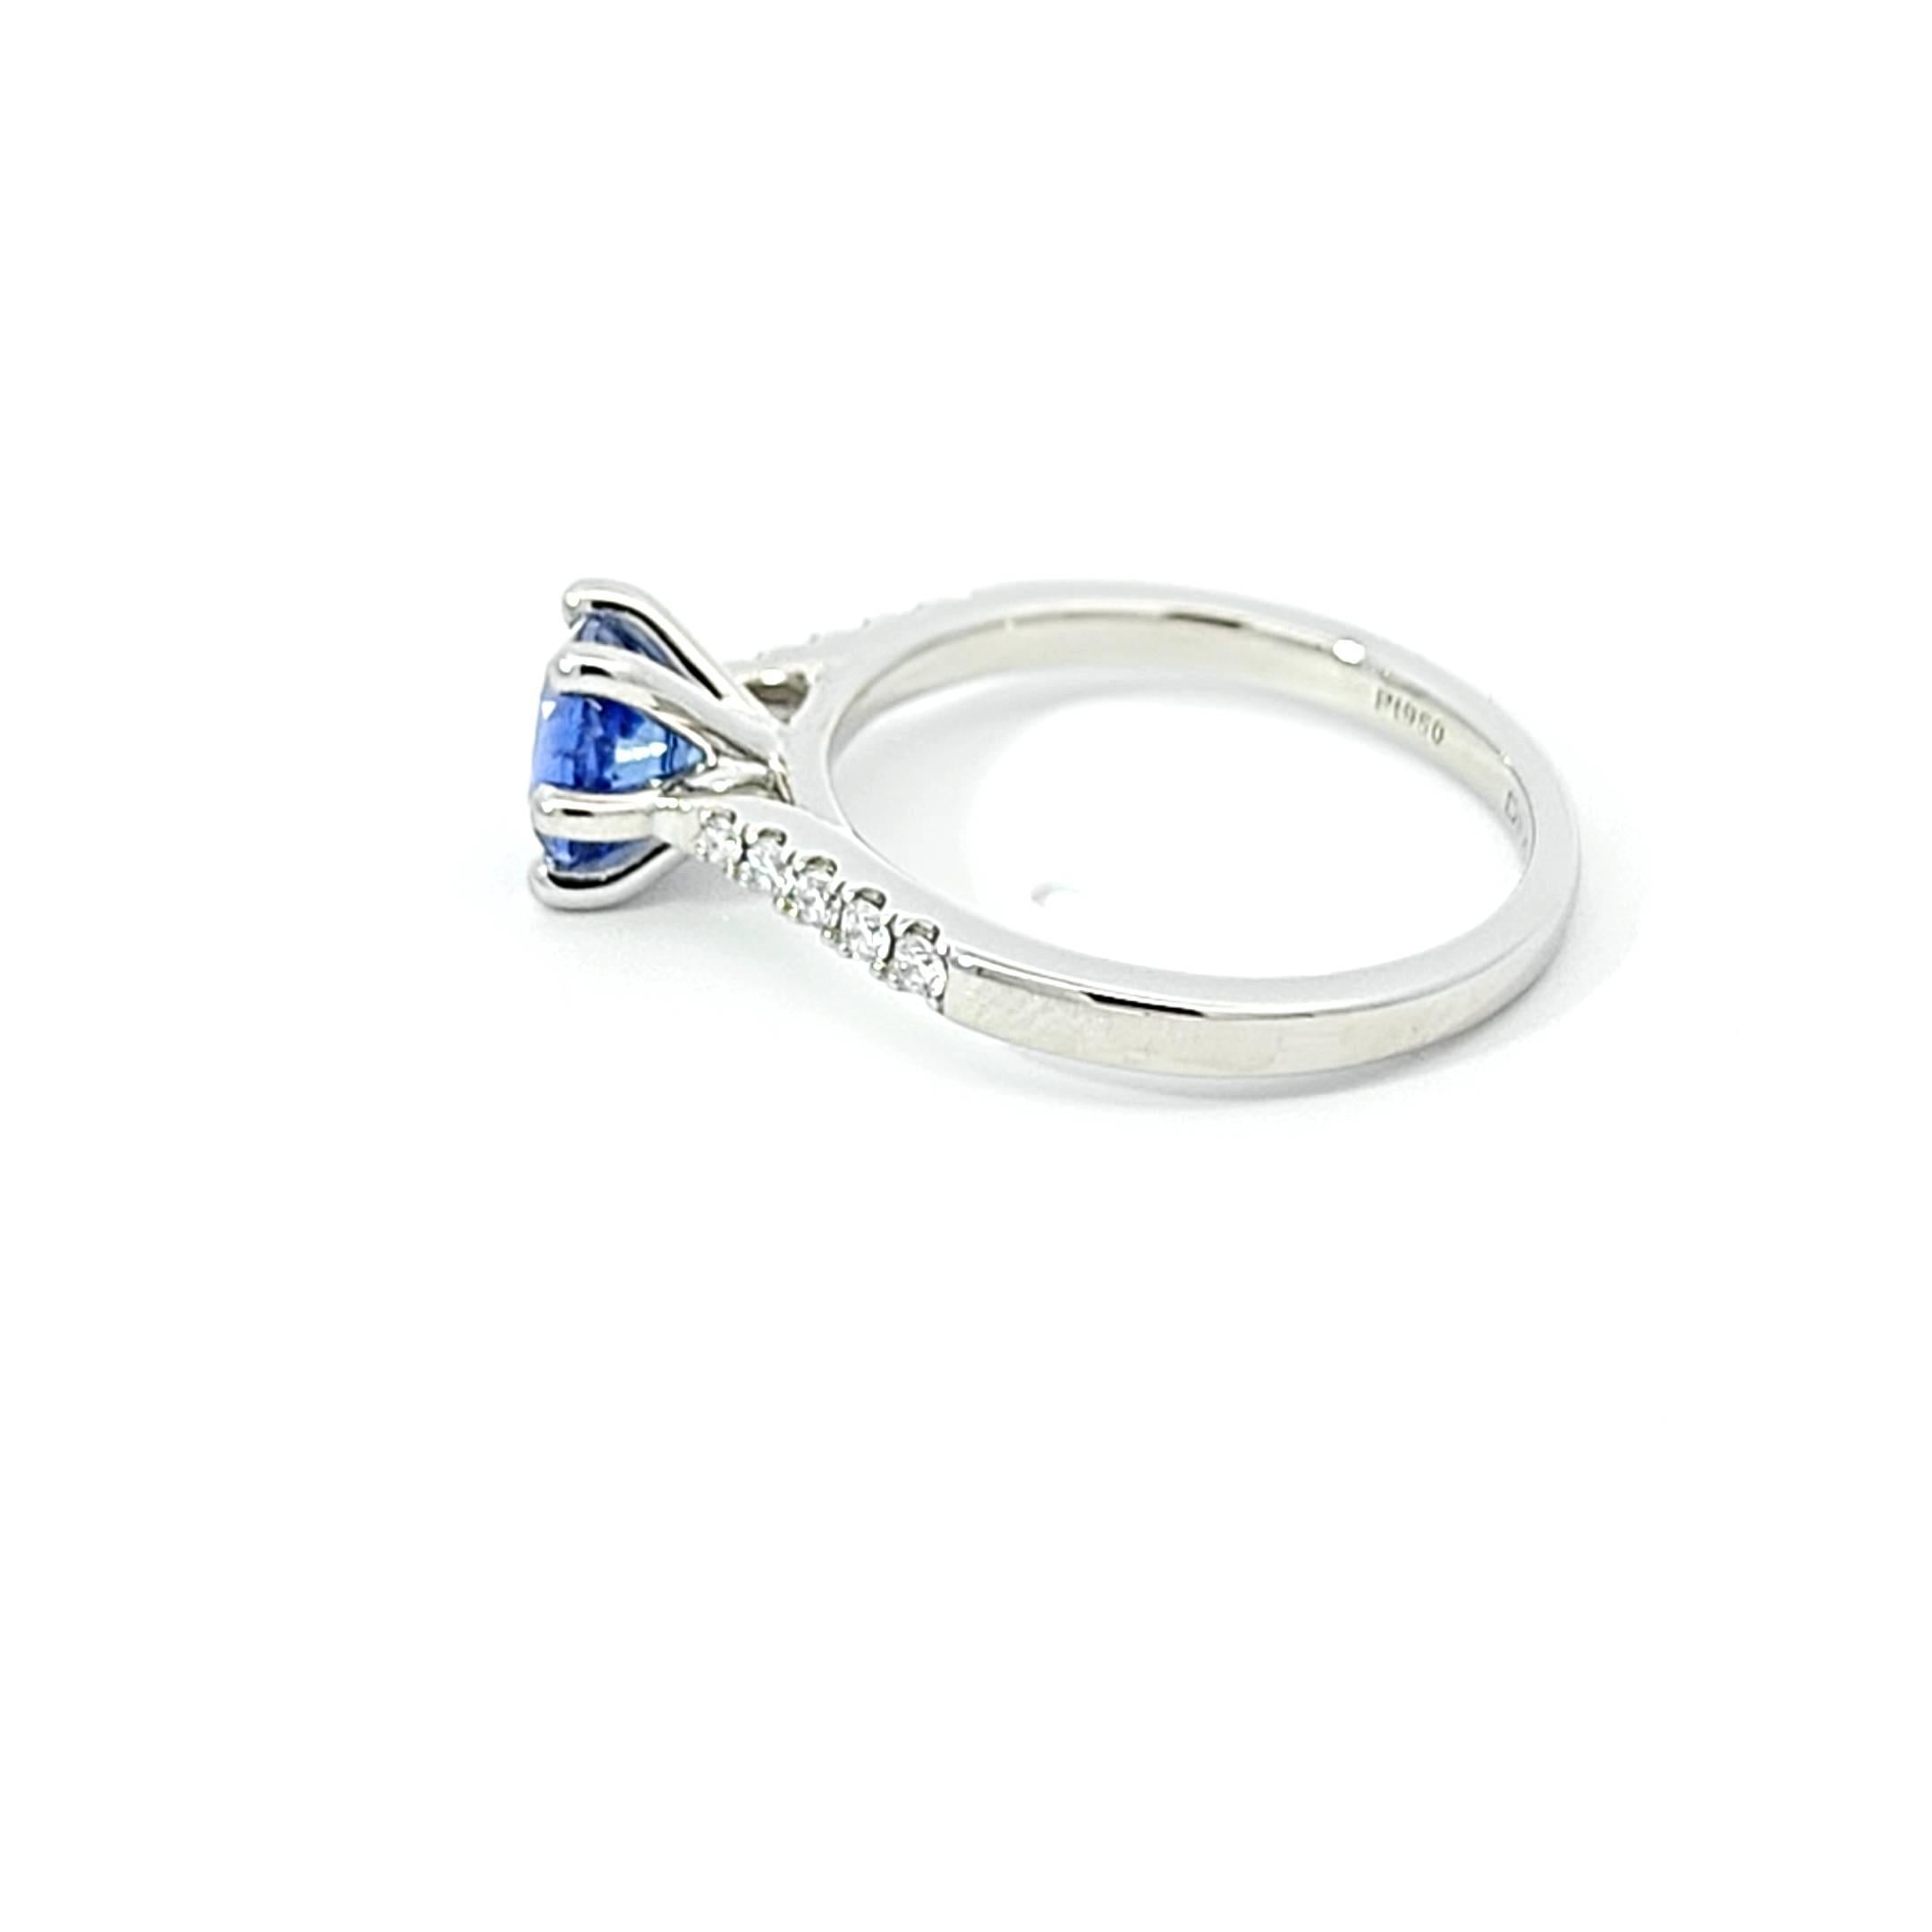 Round Cut Stunning PT950 Ring with Ceylon Blue Sapphire and White Diamonds. Certified